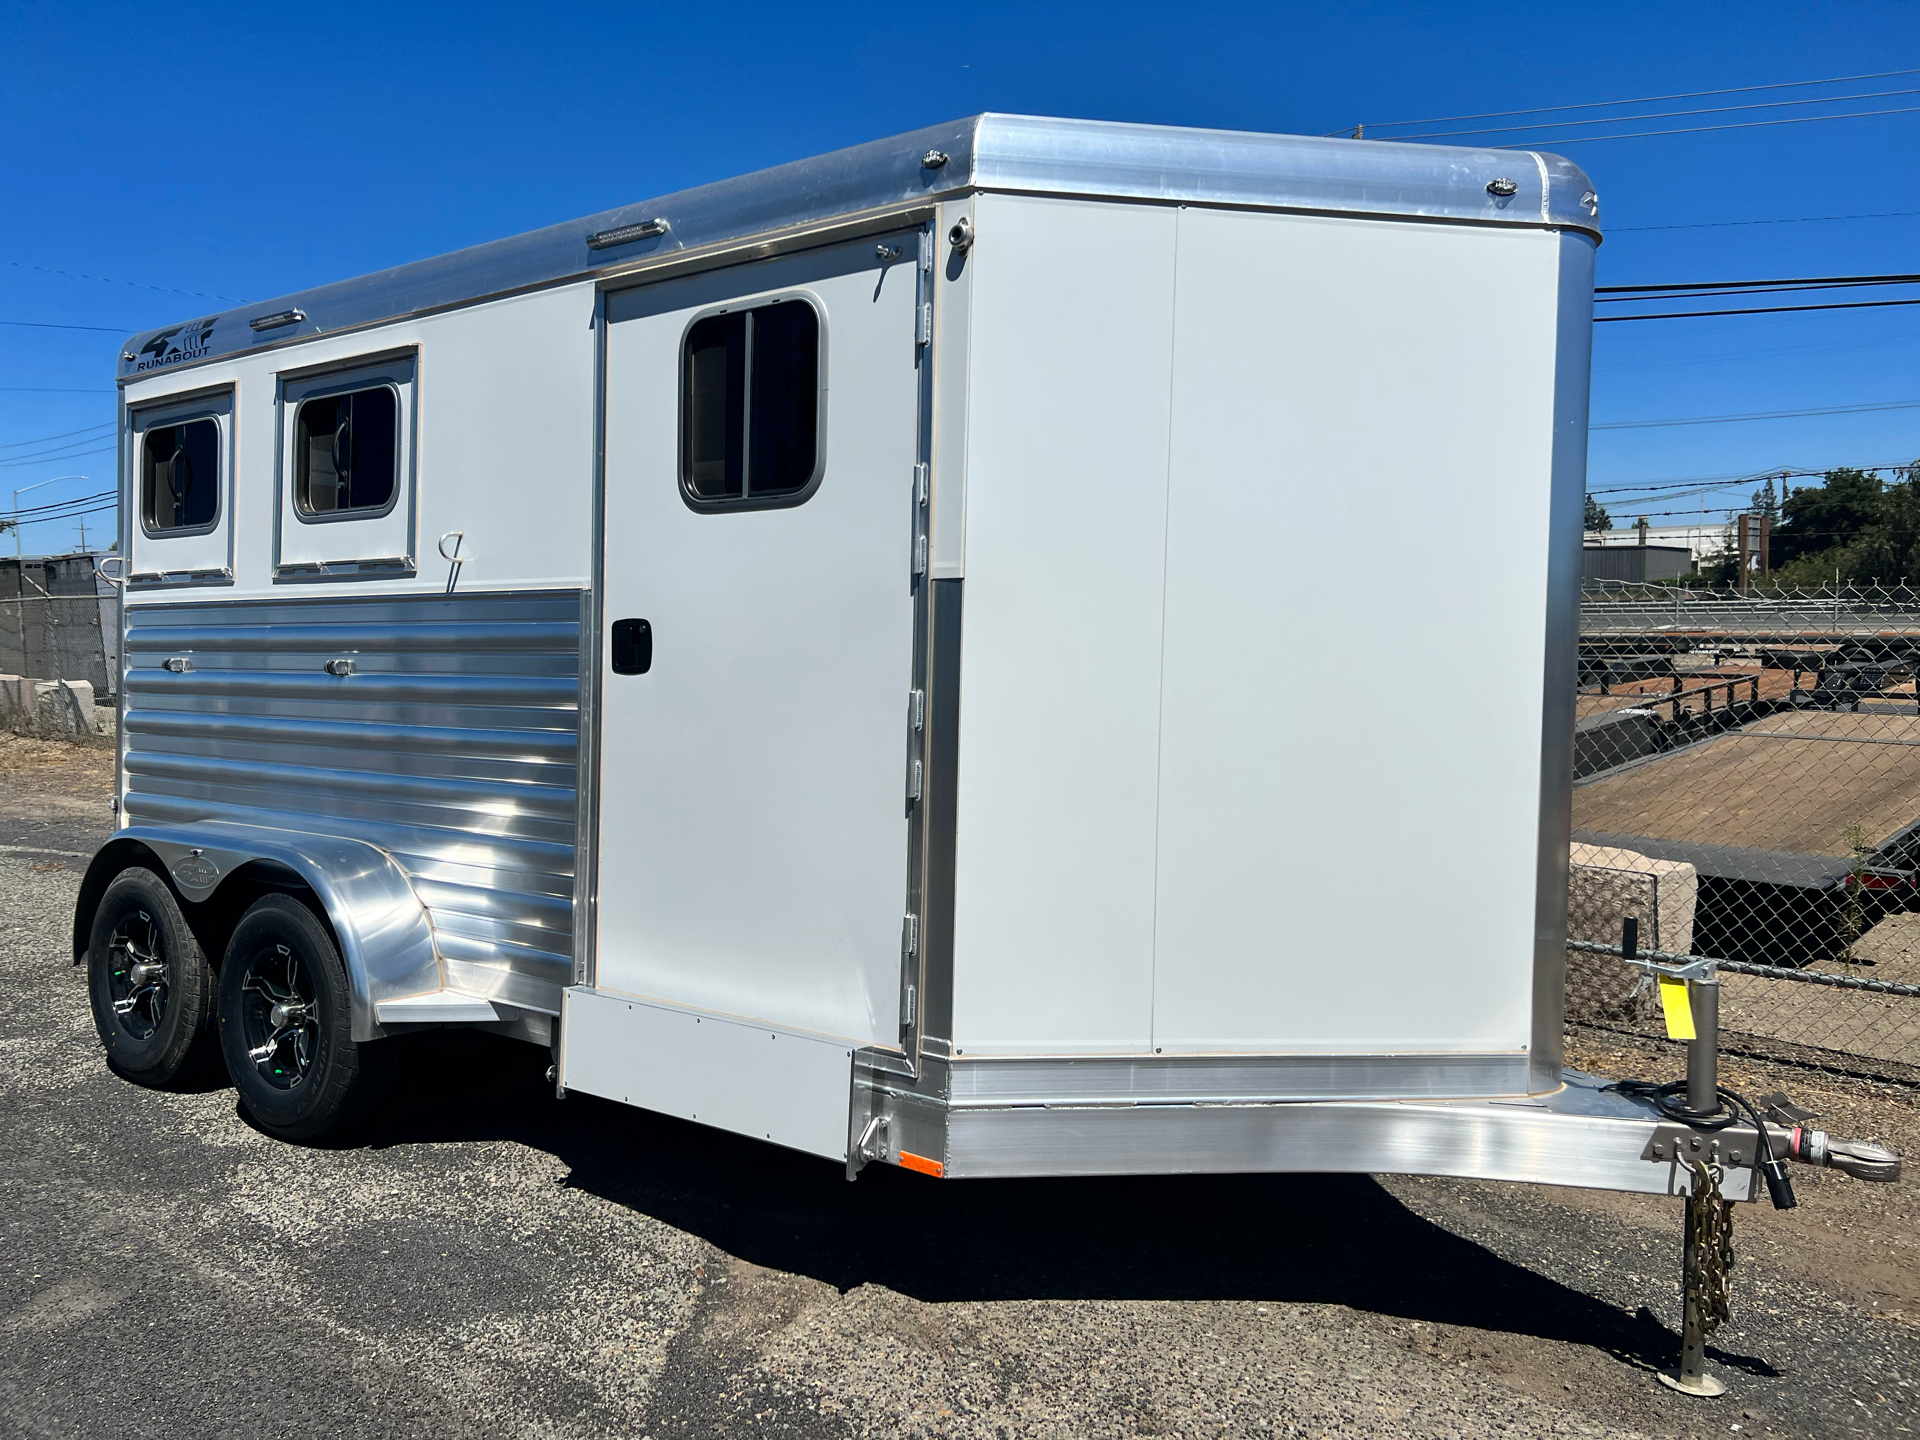 2023 4-Star Trailers 2H RUNABOUT in Acampo, California - Photo 2